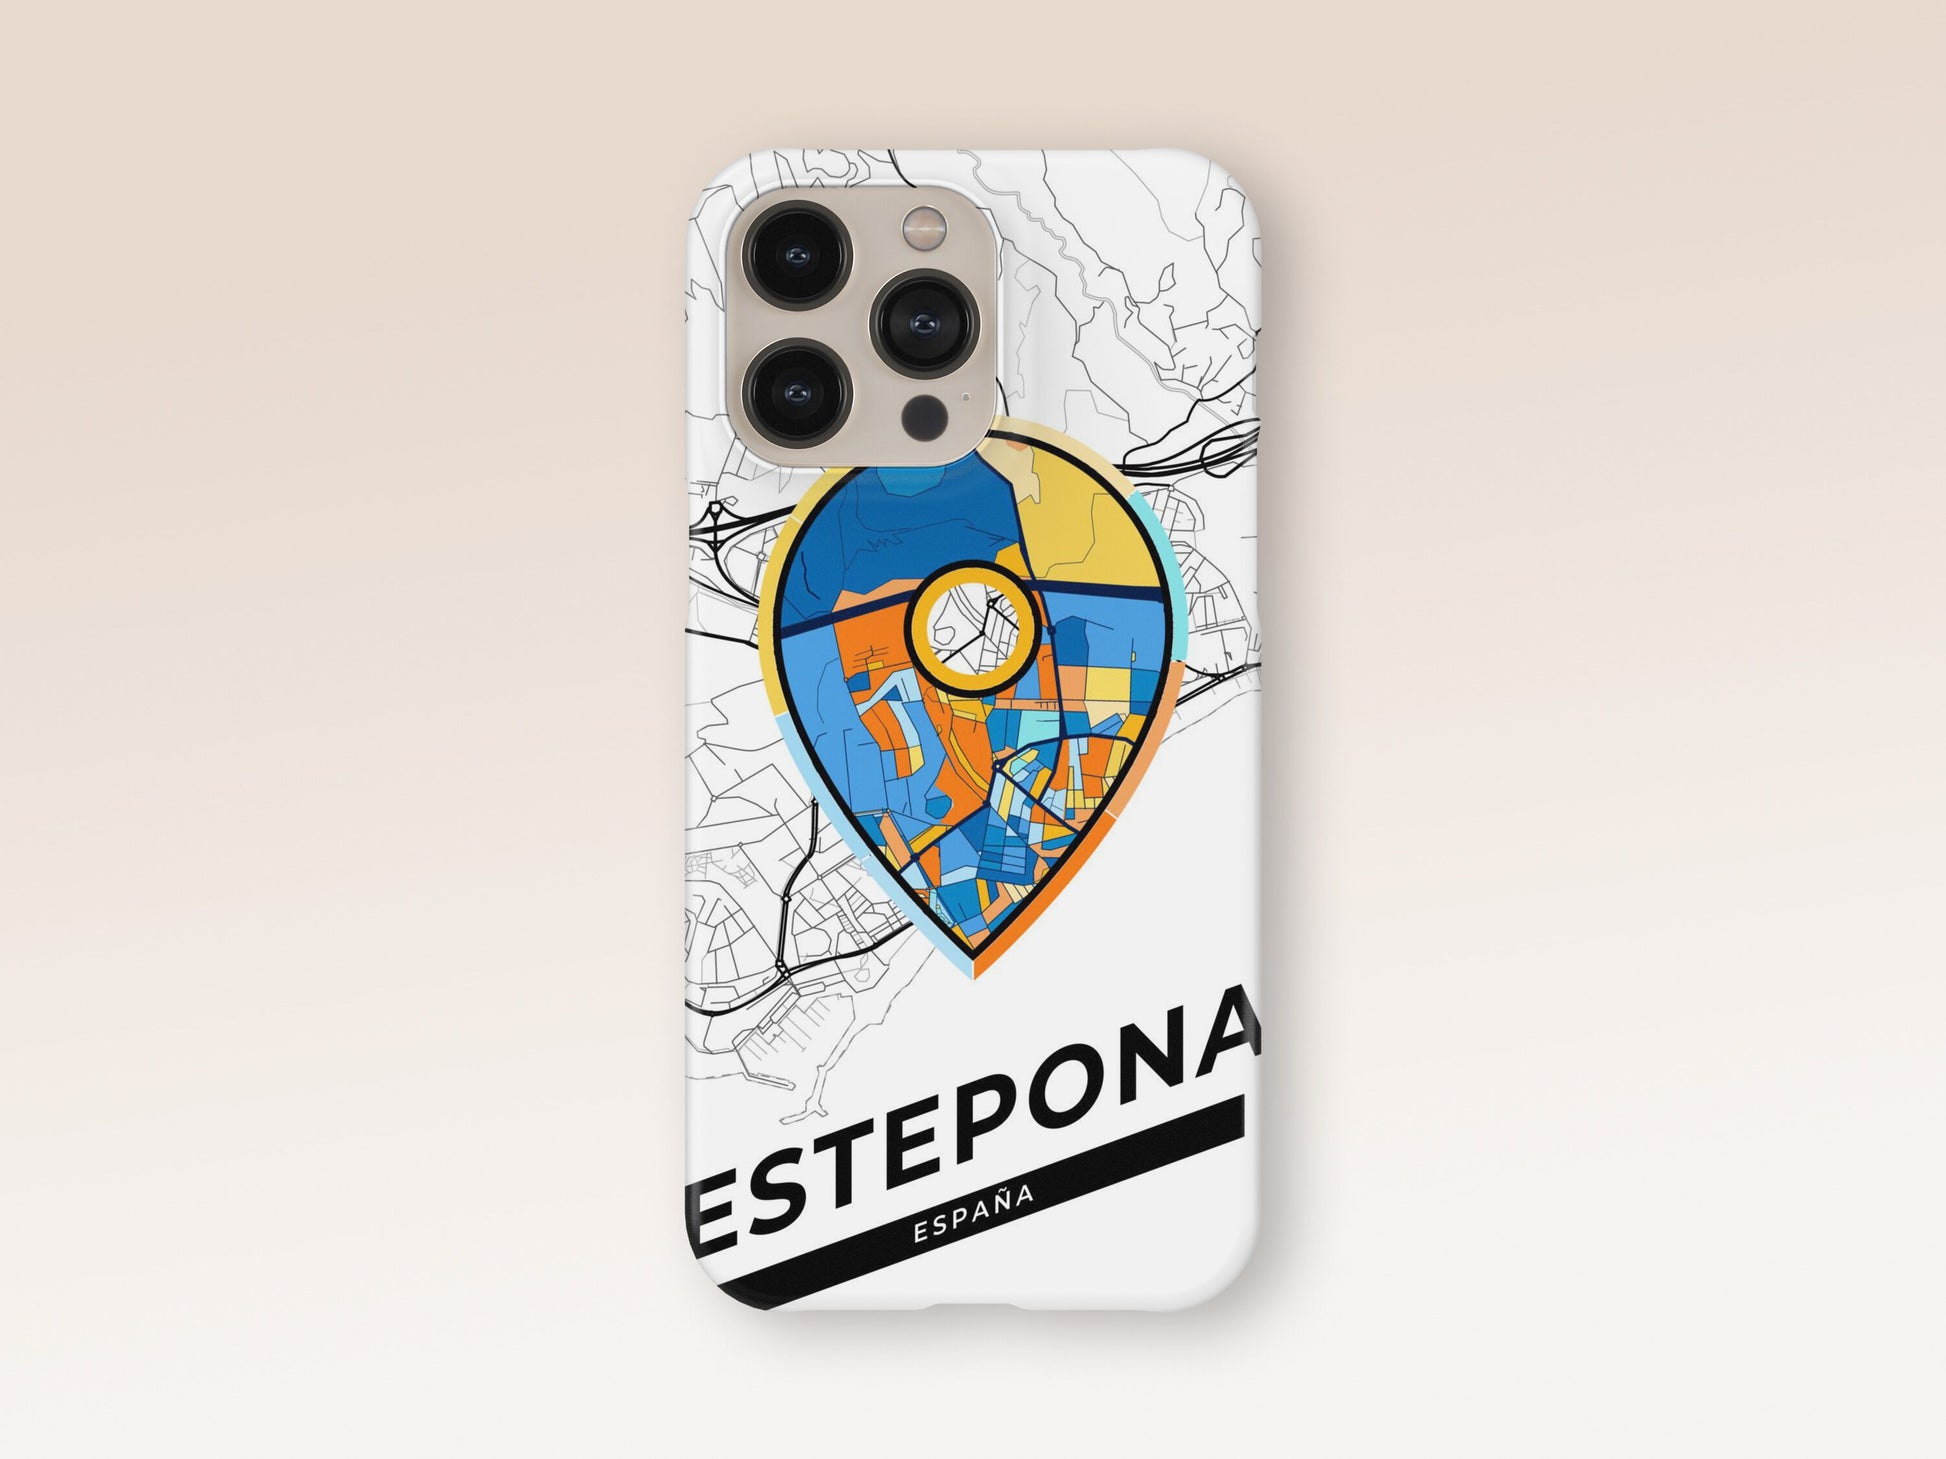 Estepona Spain slim phone case with colorful icon. Birthday, wedding or housewarming gift. Couple match cases. 1